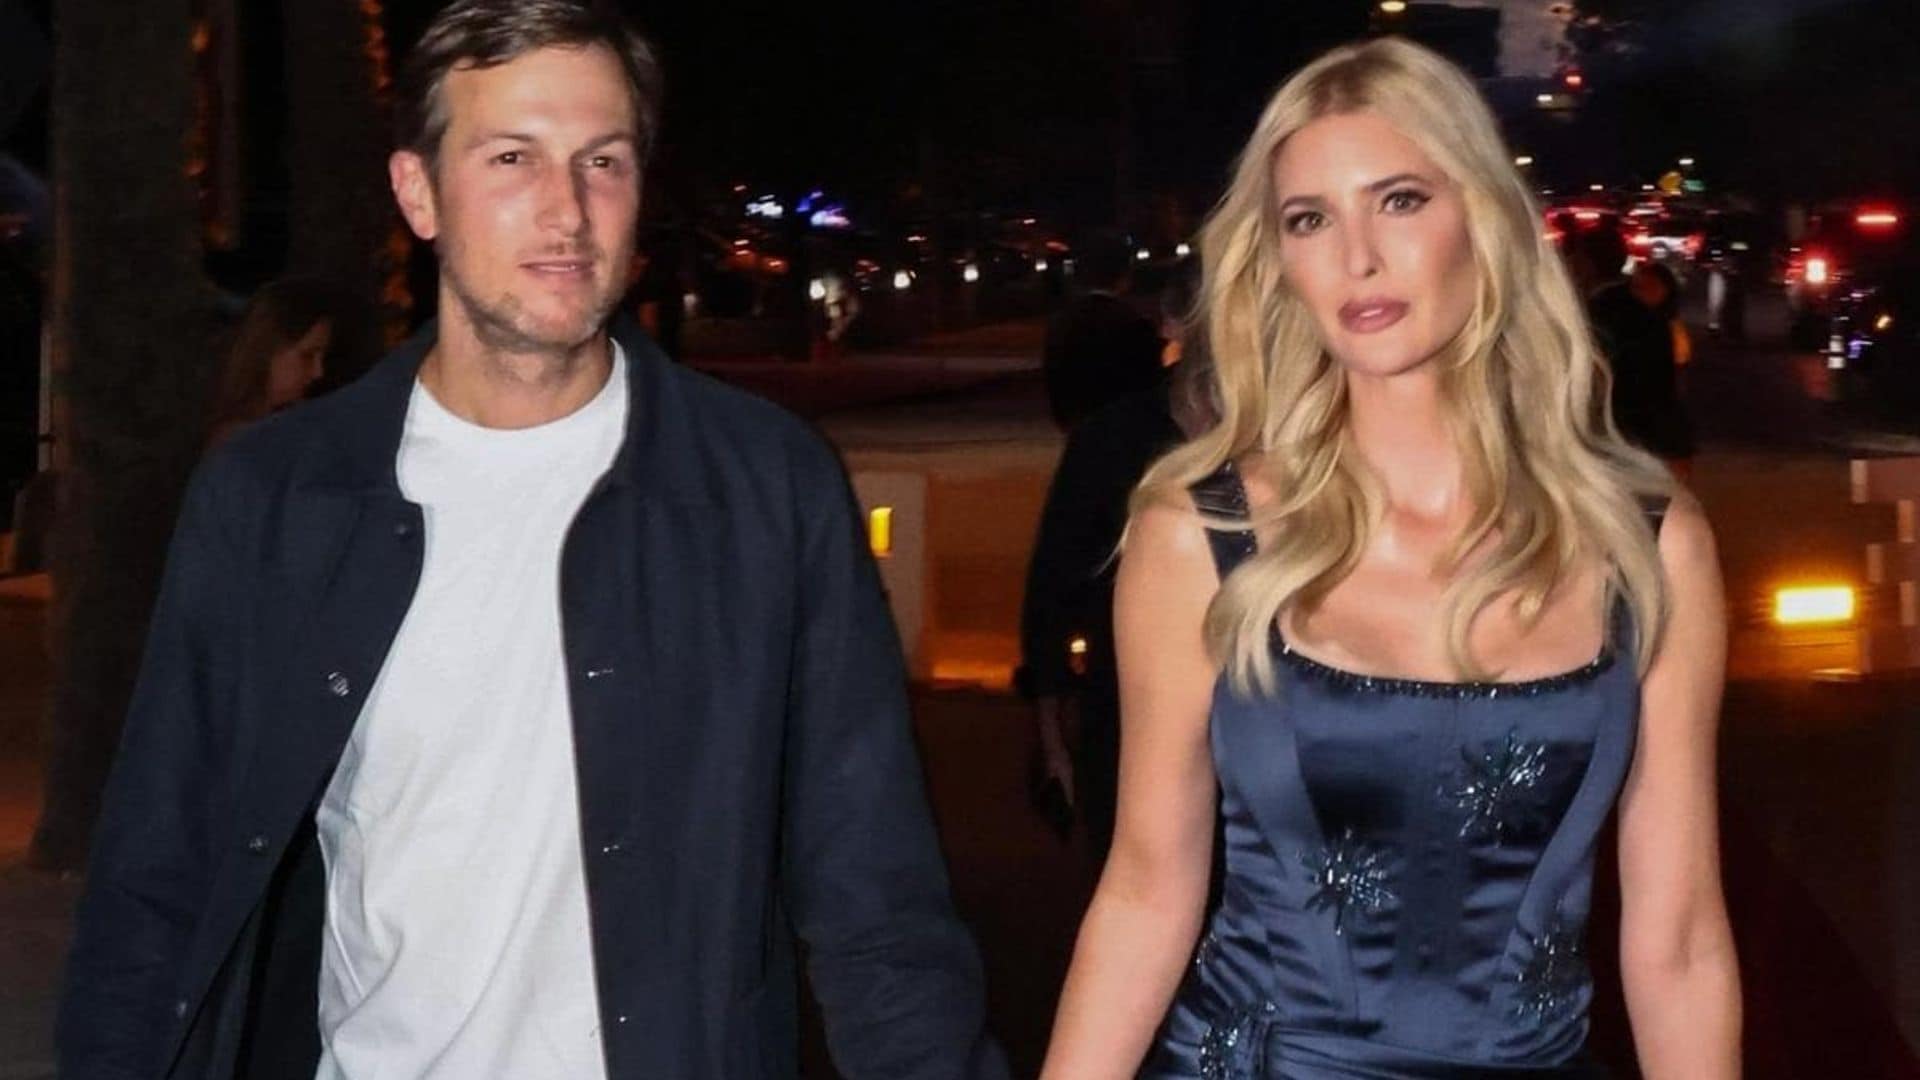 Ivanka Trump wears a little blue dress for date night with Jared Kushner